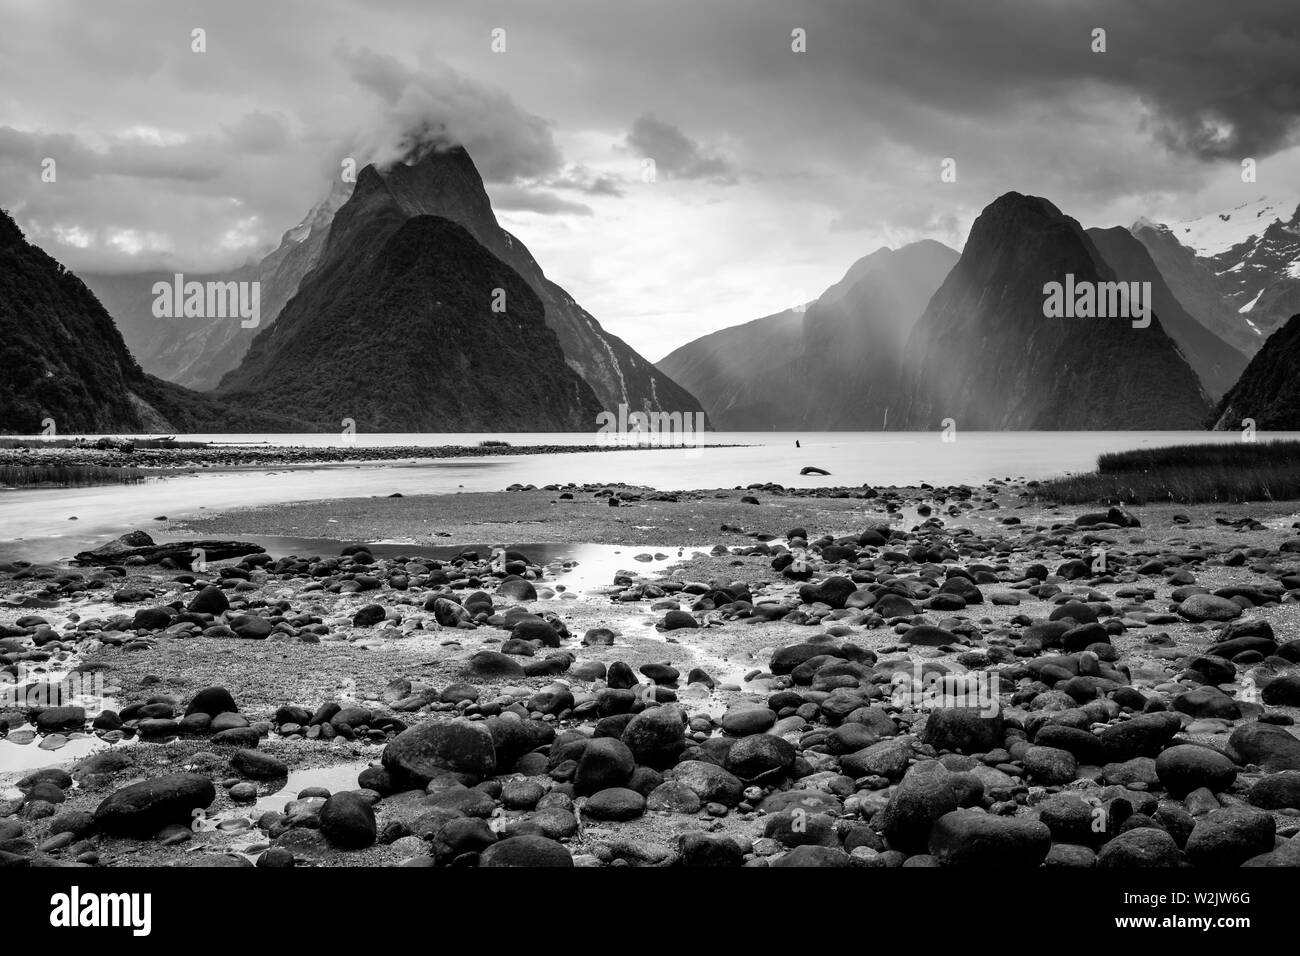 Milford Sound, Fiordland National Park, South Island, New Zealand Banque D'Images